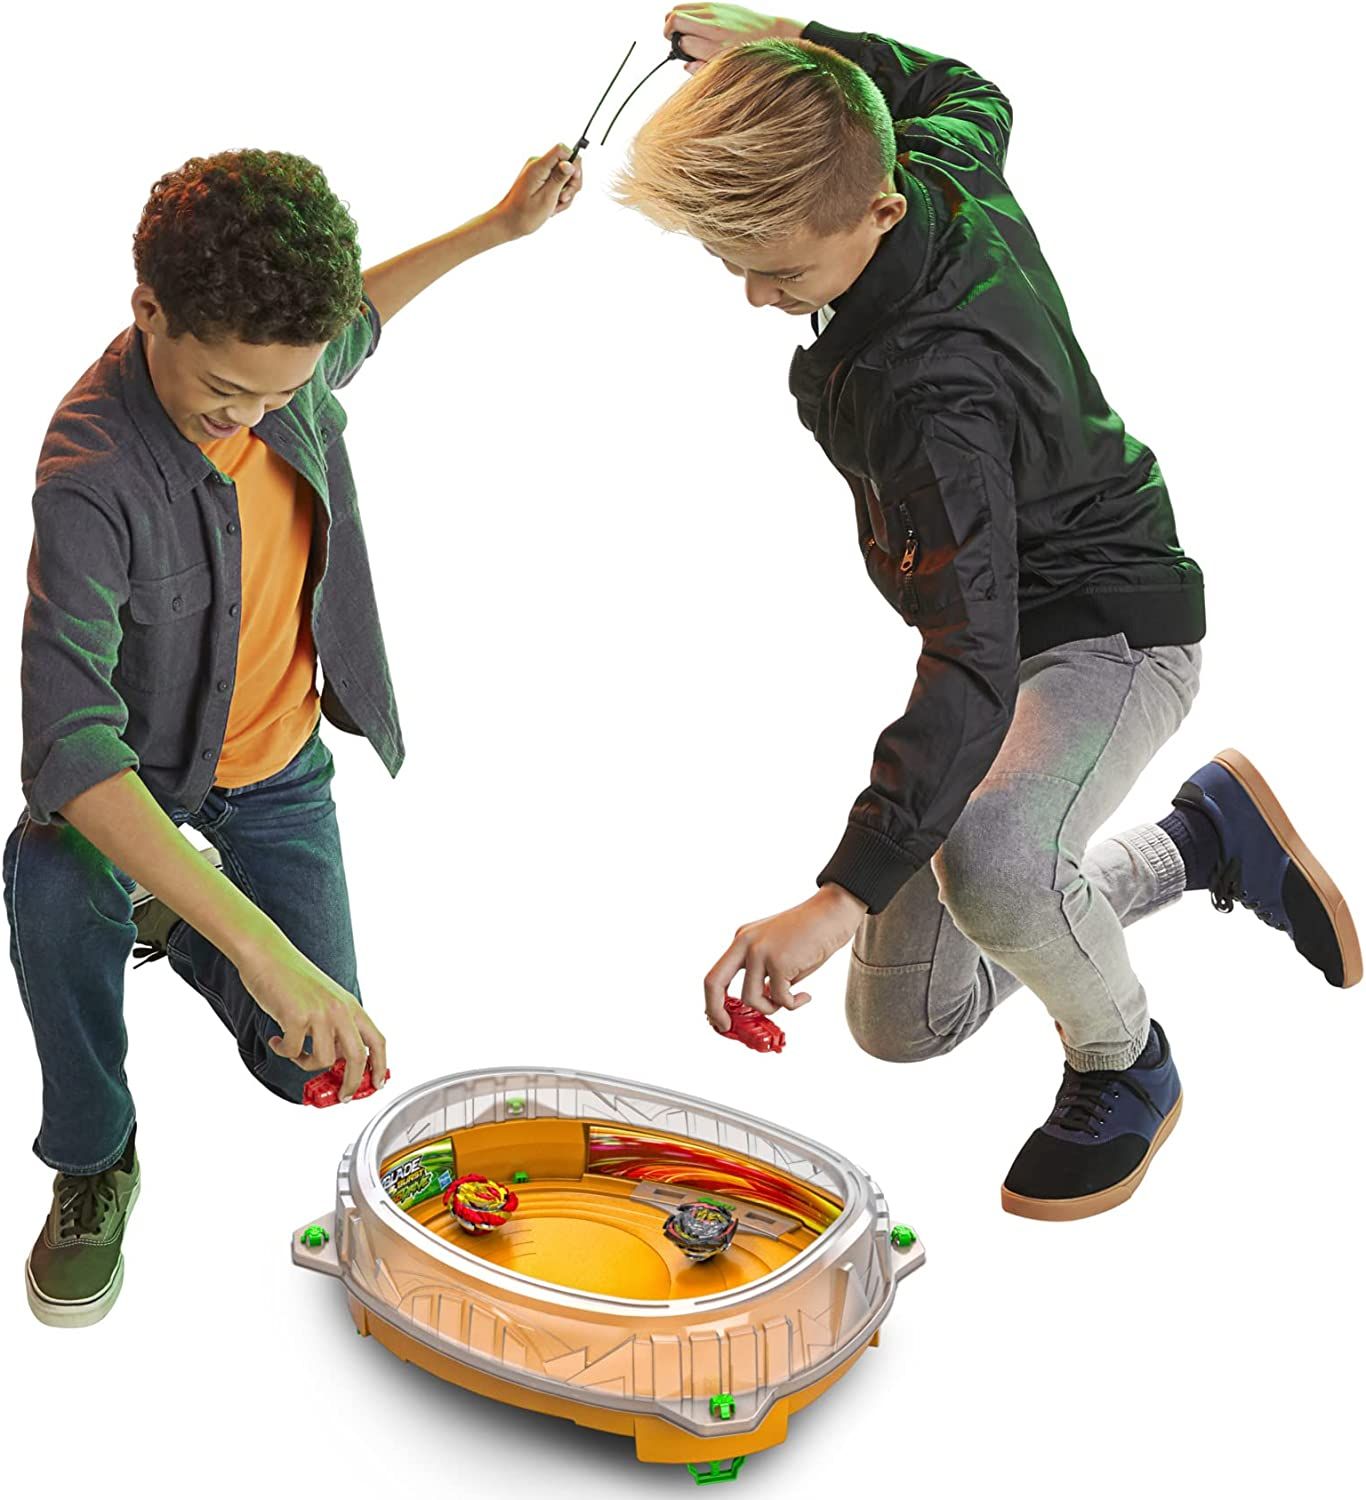 Beyblade Burst QuadDrive is one of the best Beyblade stadiums